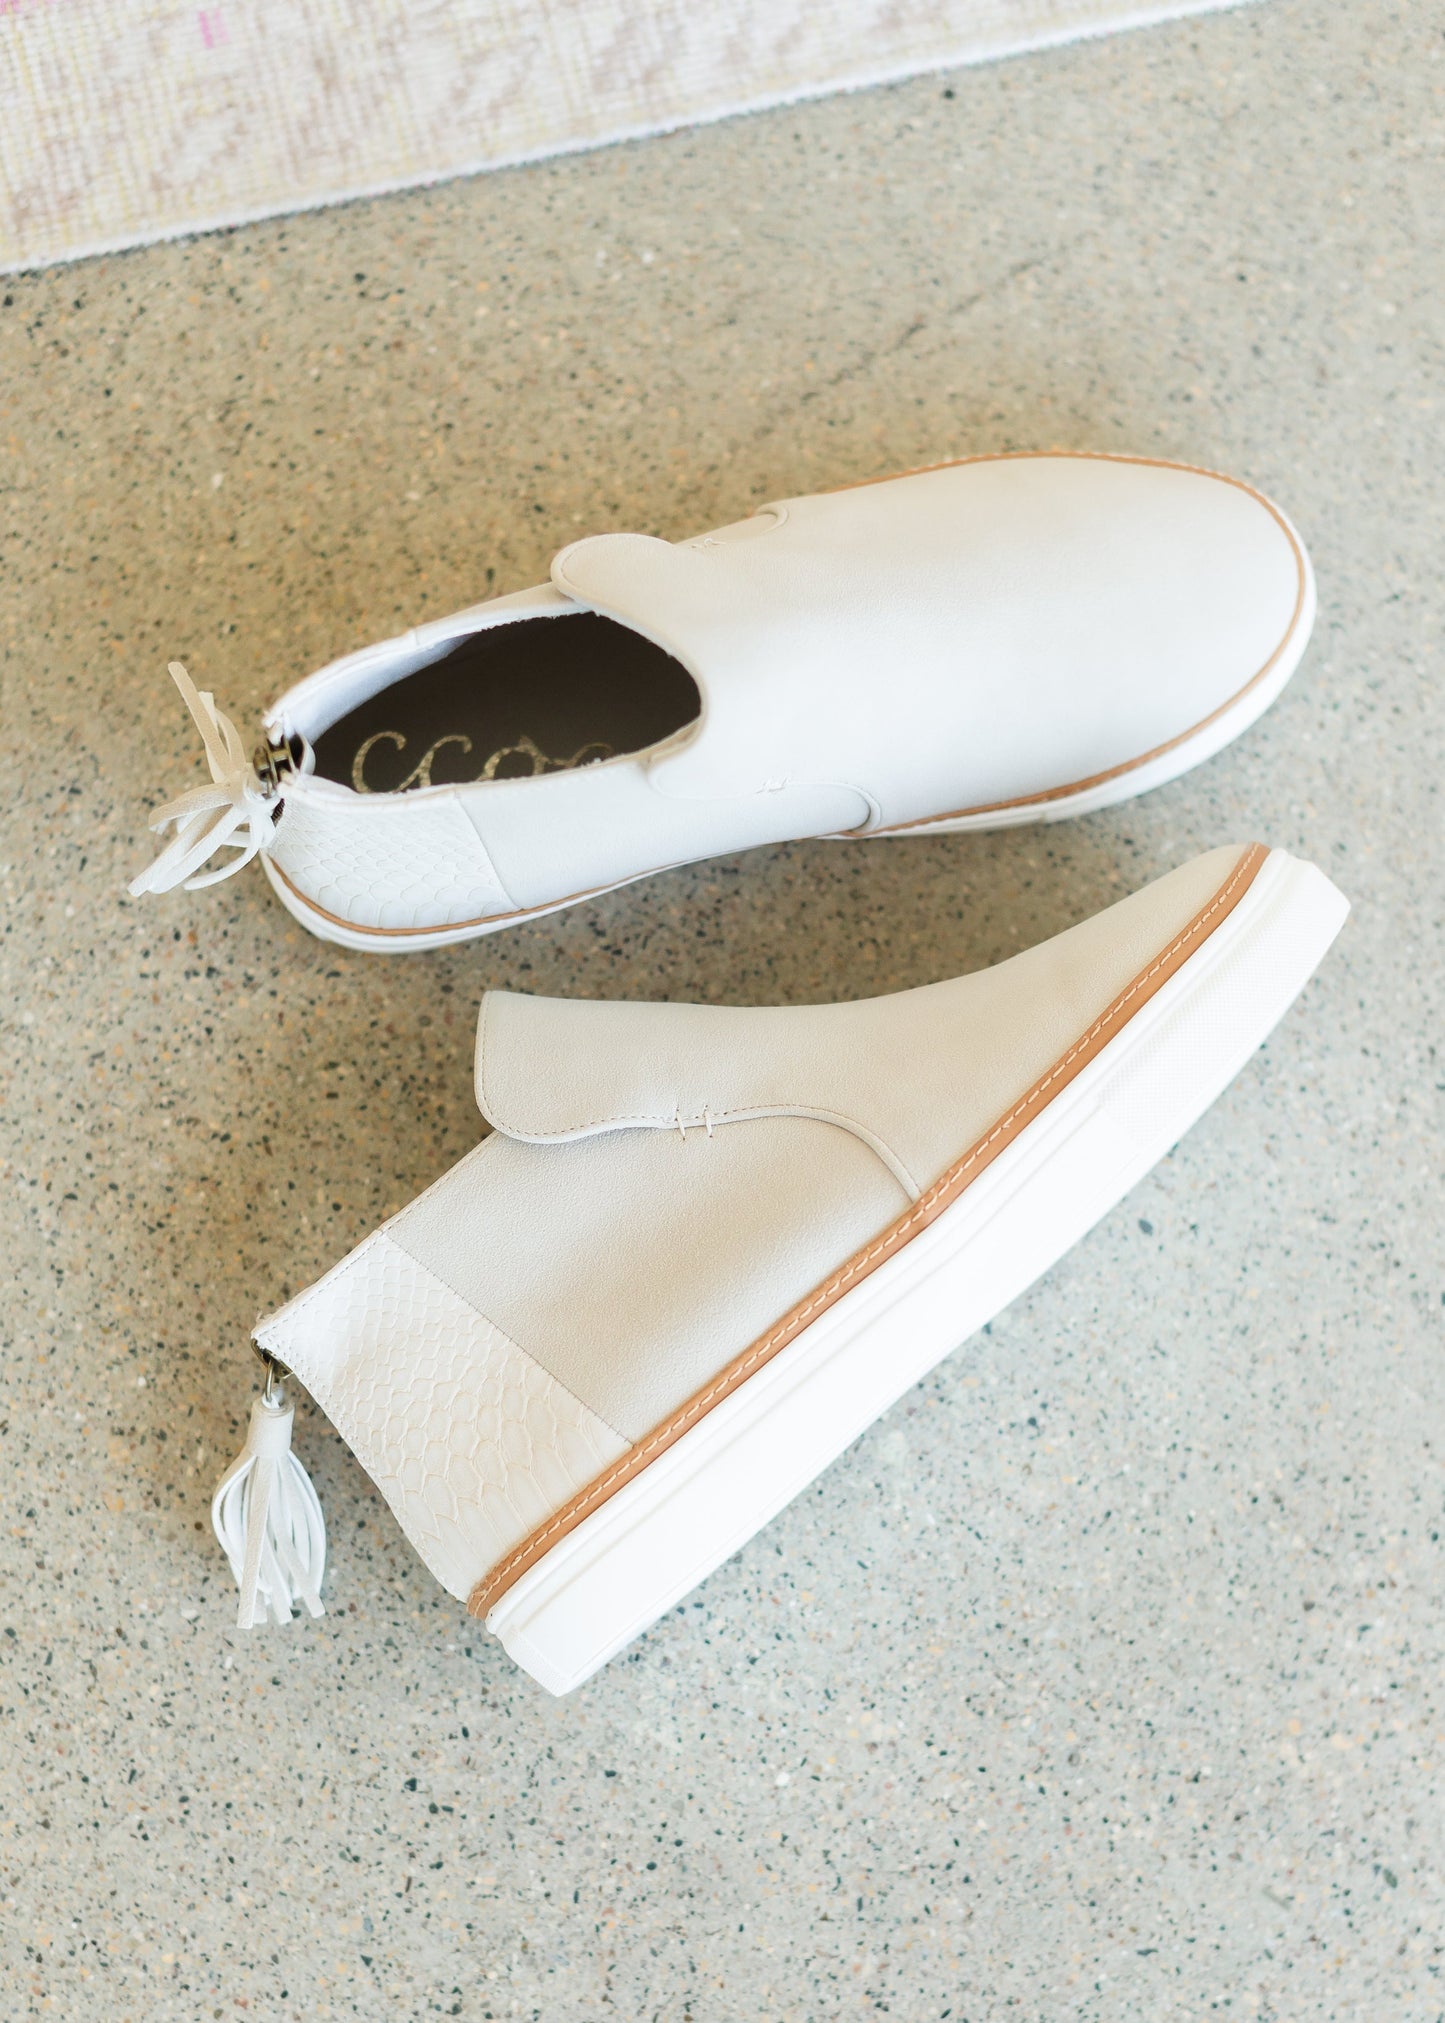 Stone Sneaker with Zipper Detail - FINAL SALE Shoes